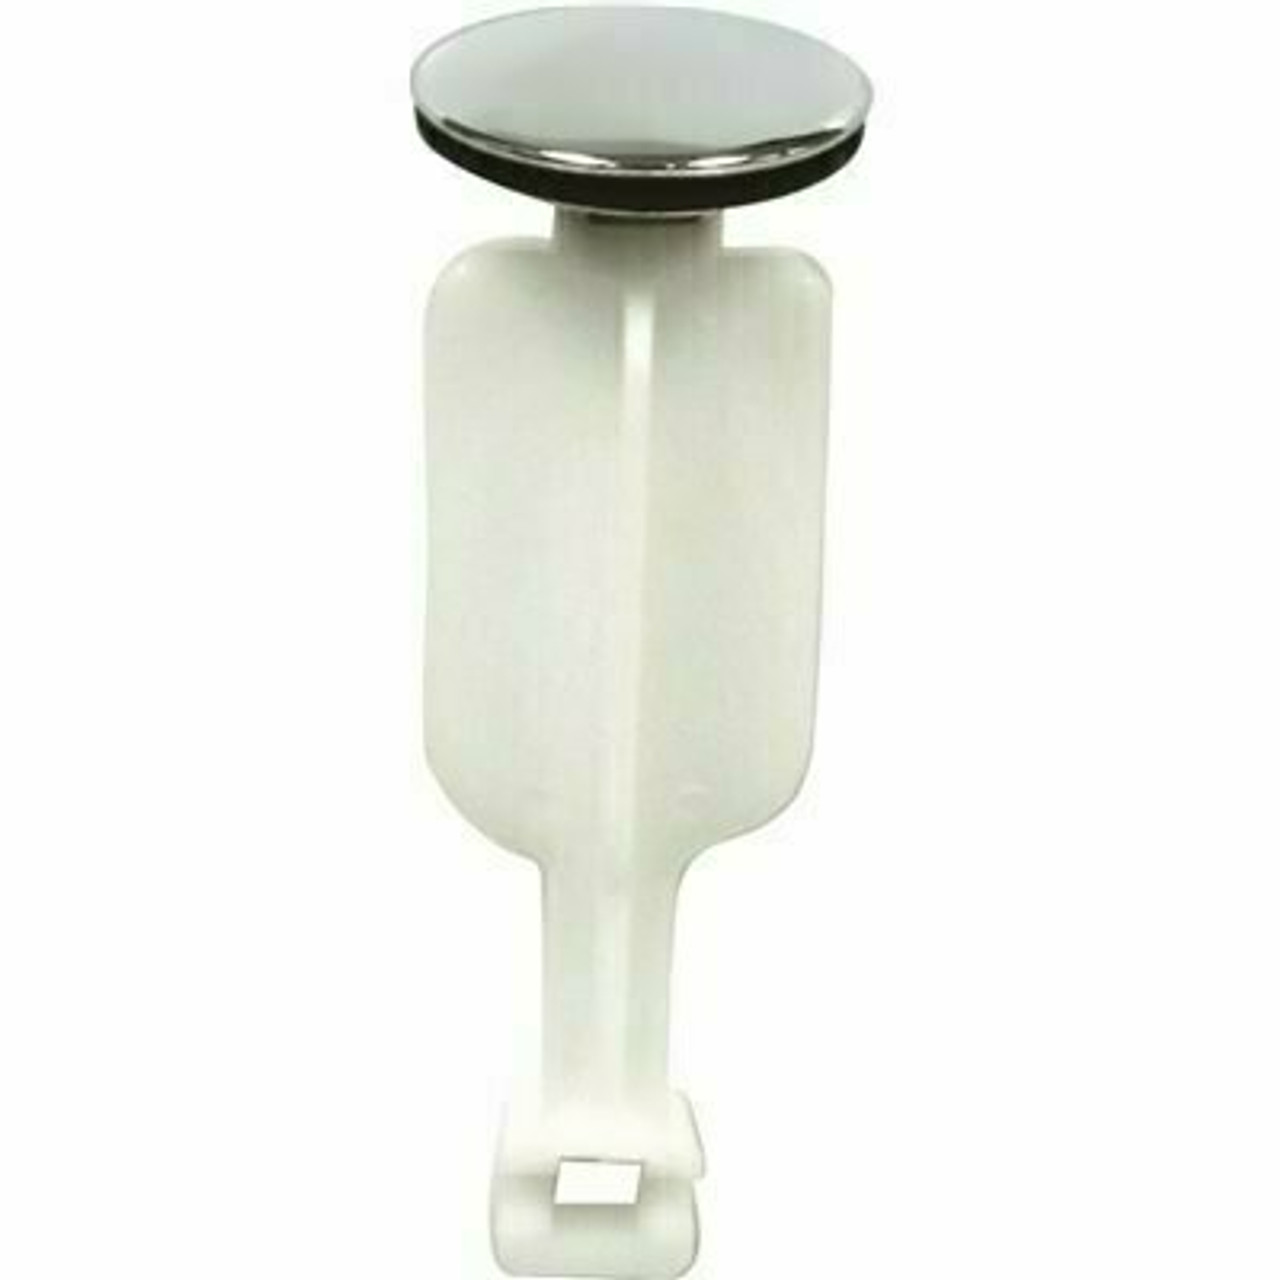 Pfister 4-1/2 In. Lavatory Pop-Up Stopper In Chrome